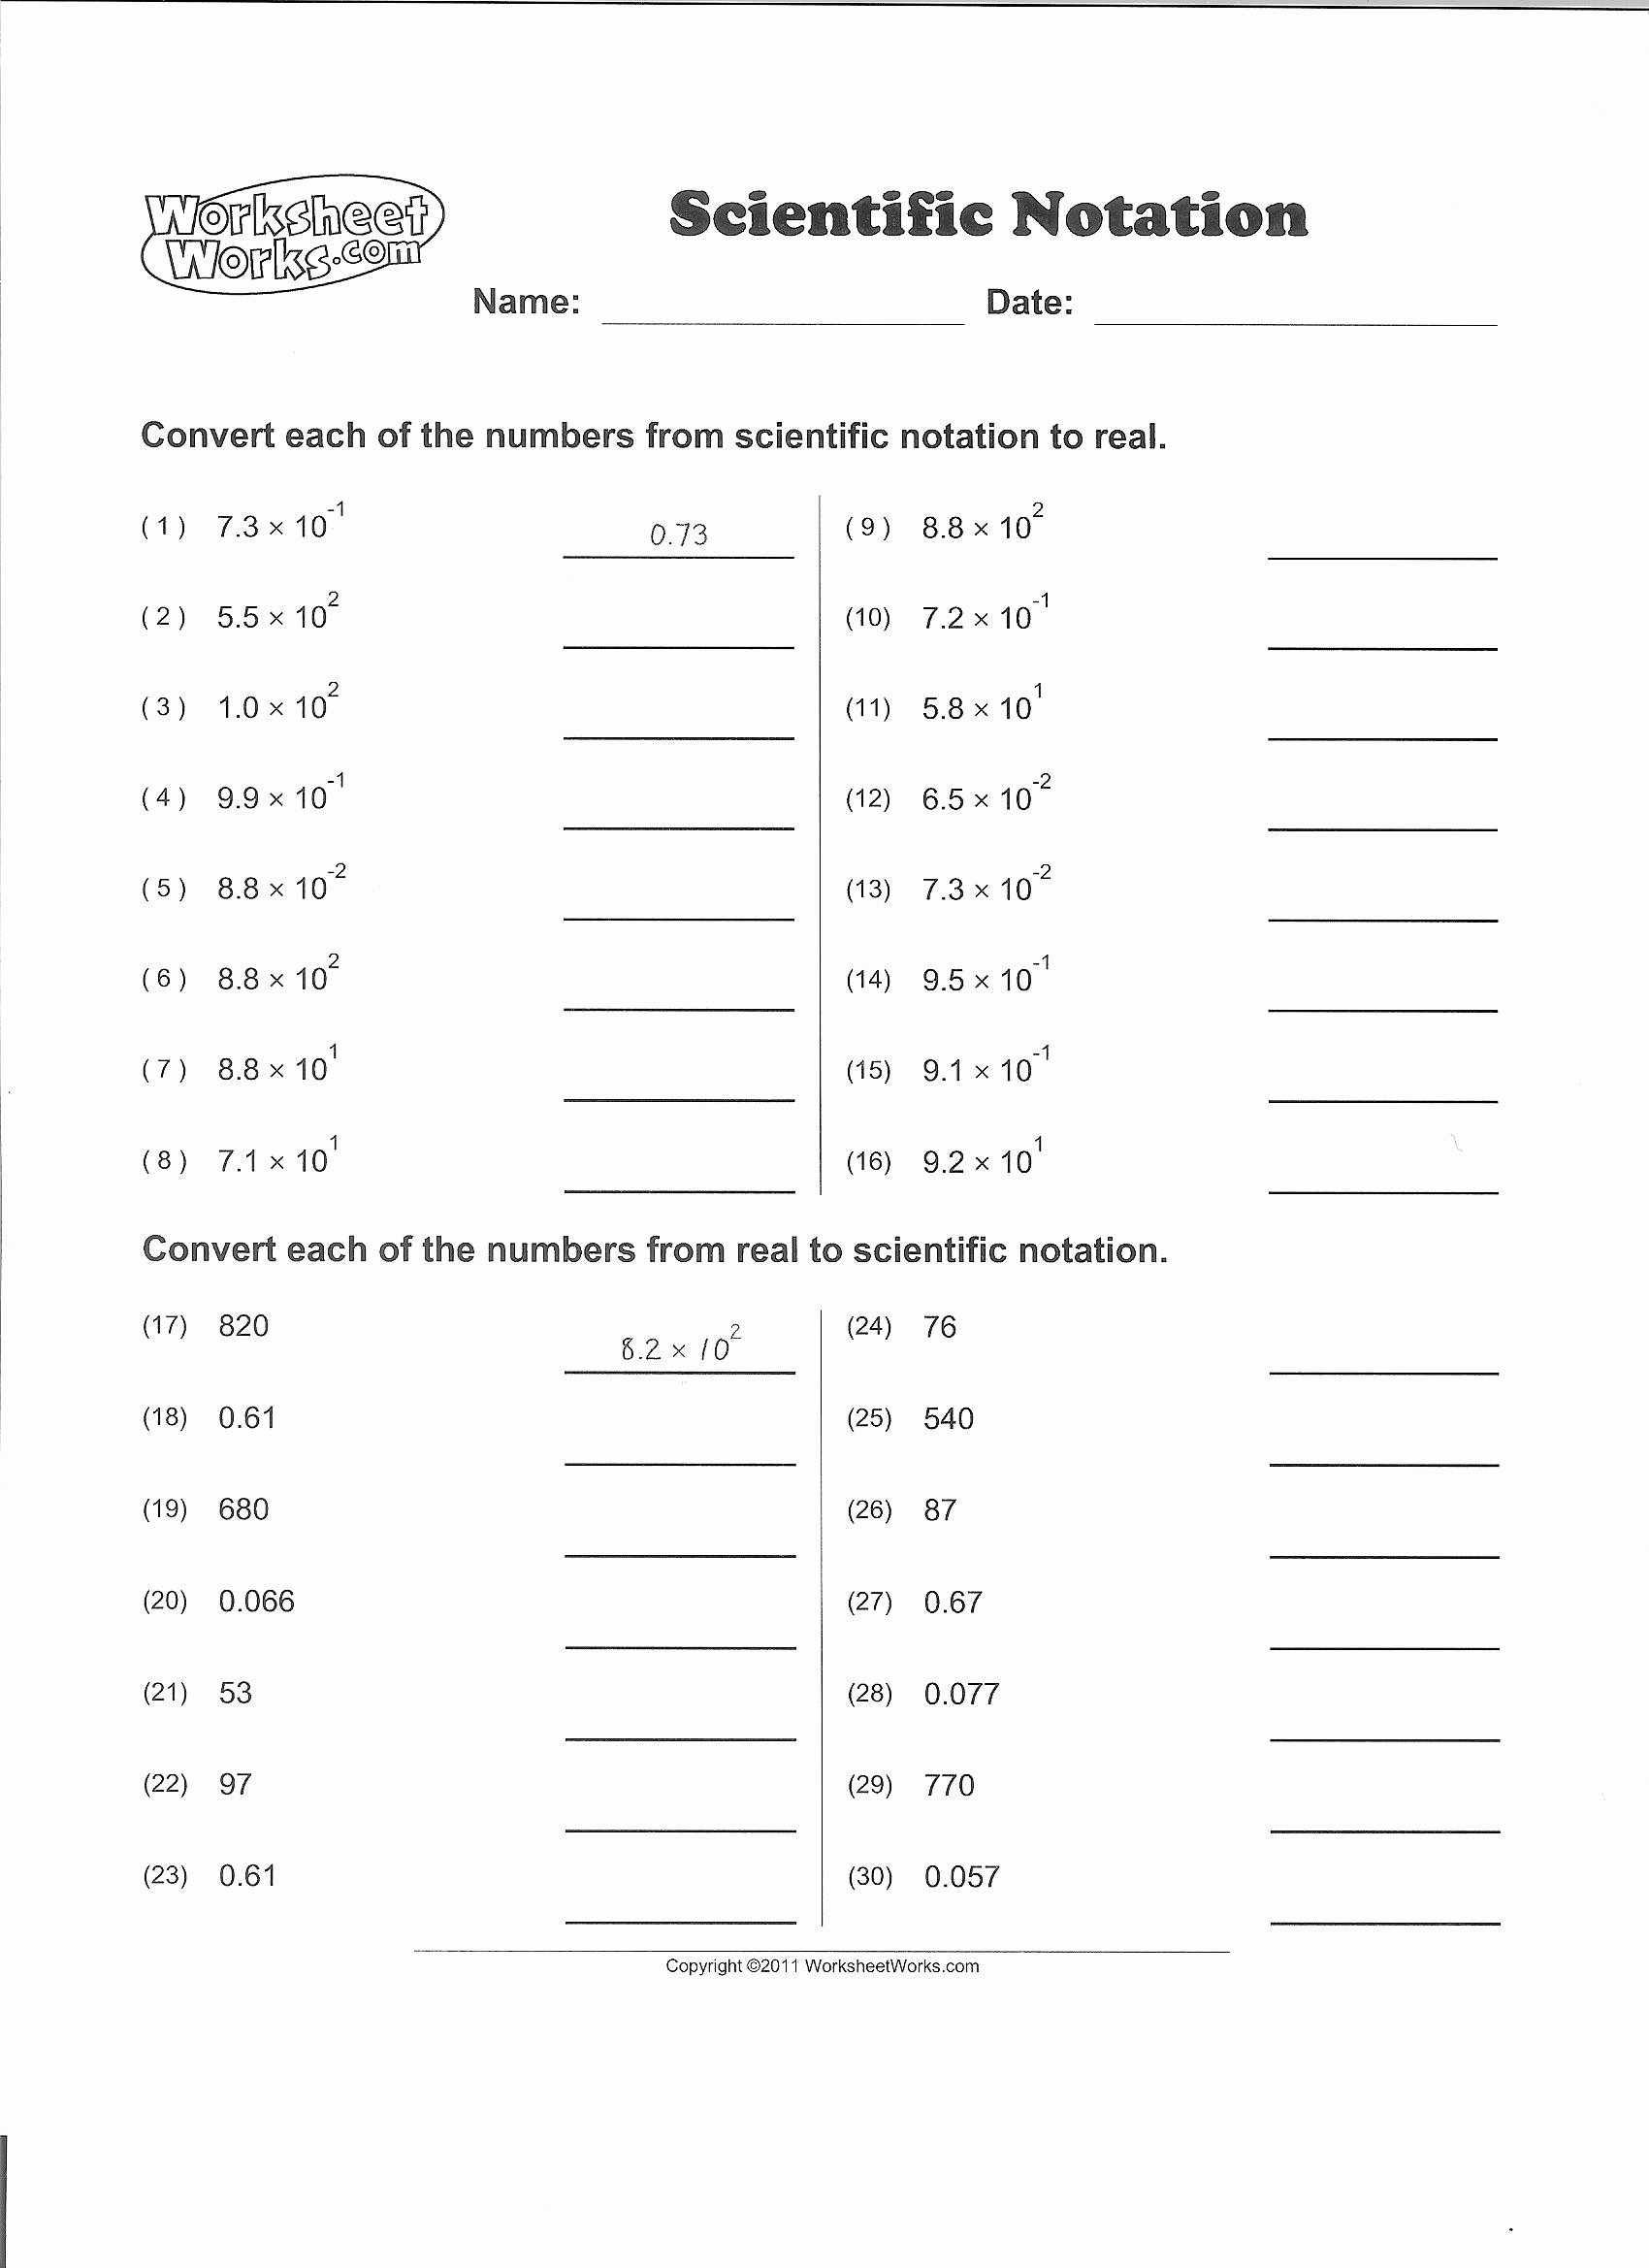 Scientific Notation Worksheet Answers Inspirational Heritage High Teachers Courses and Files